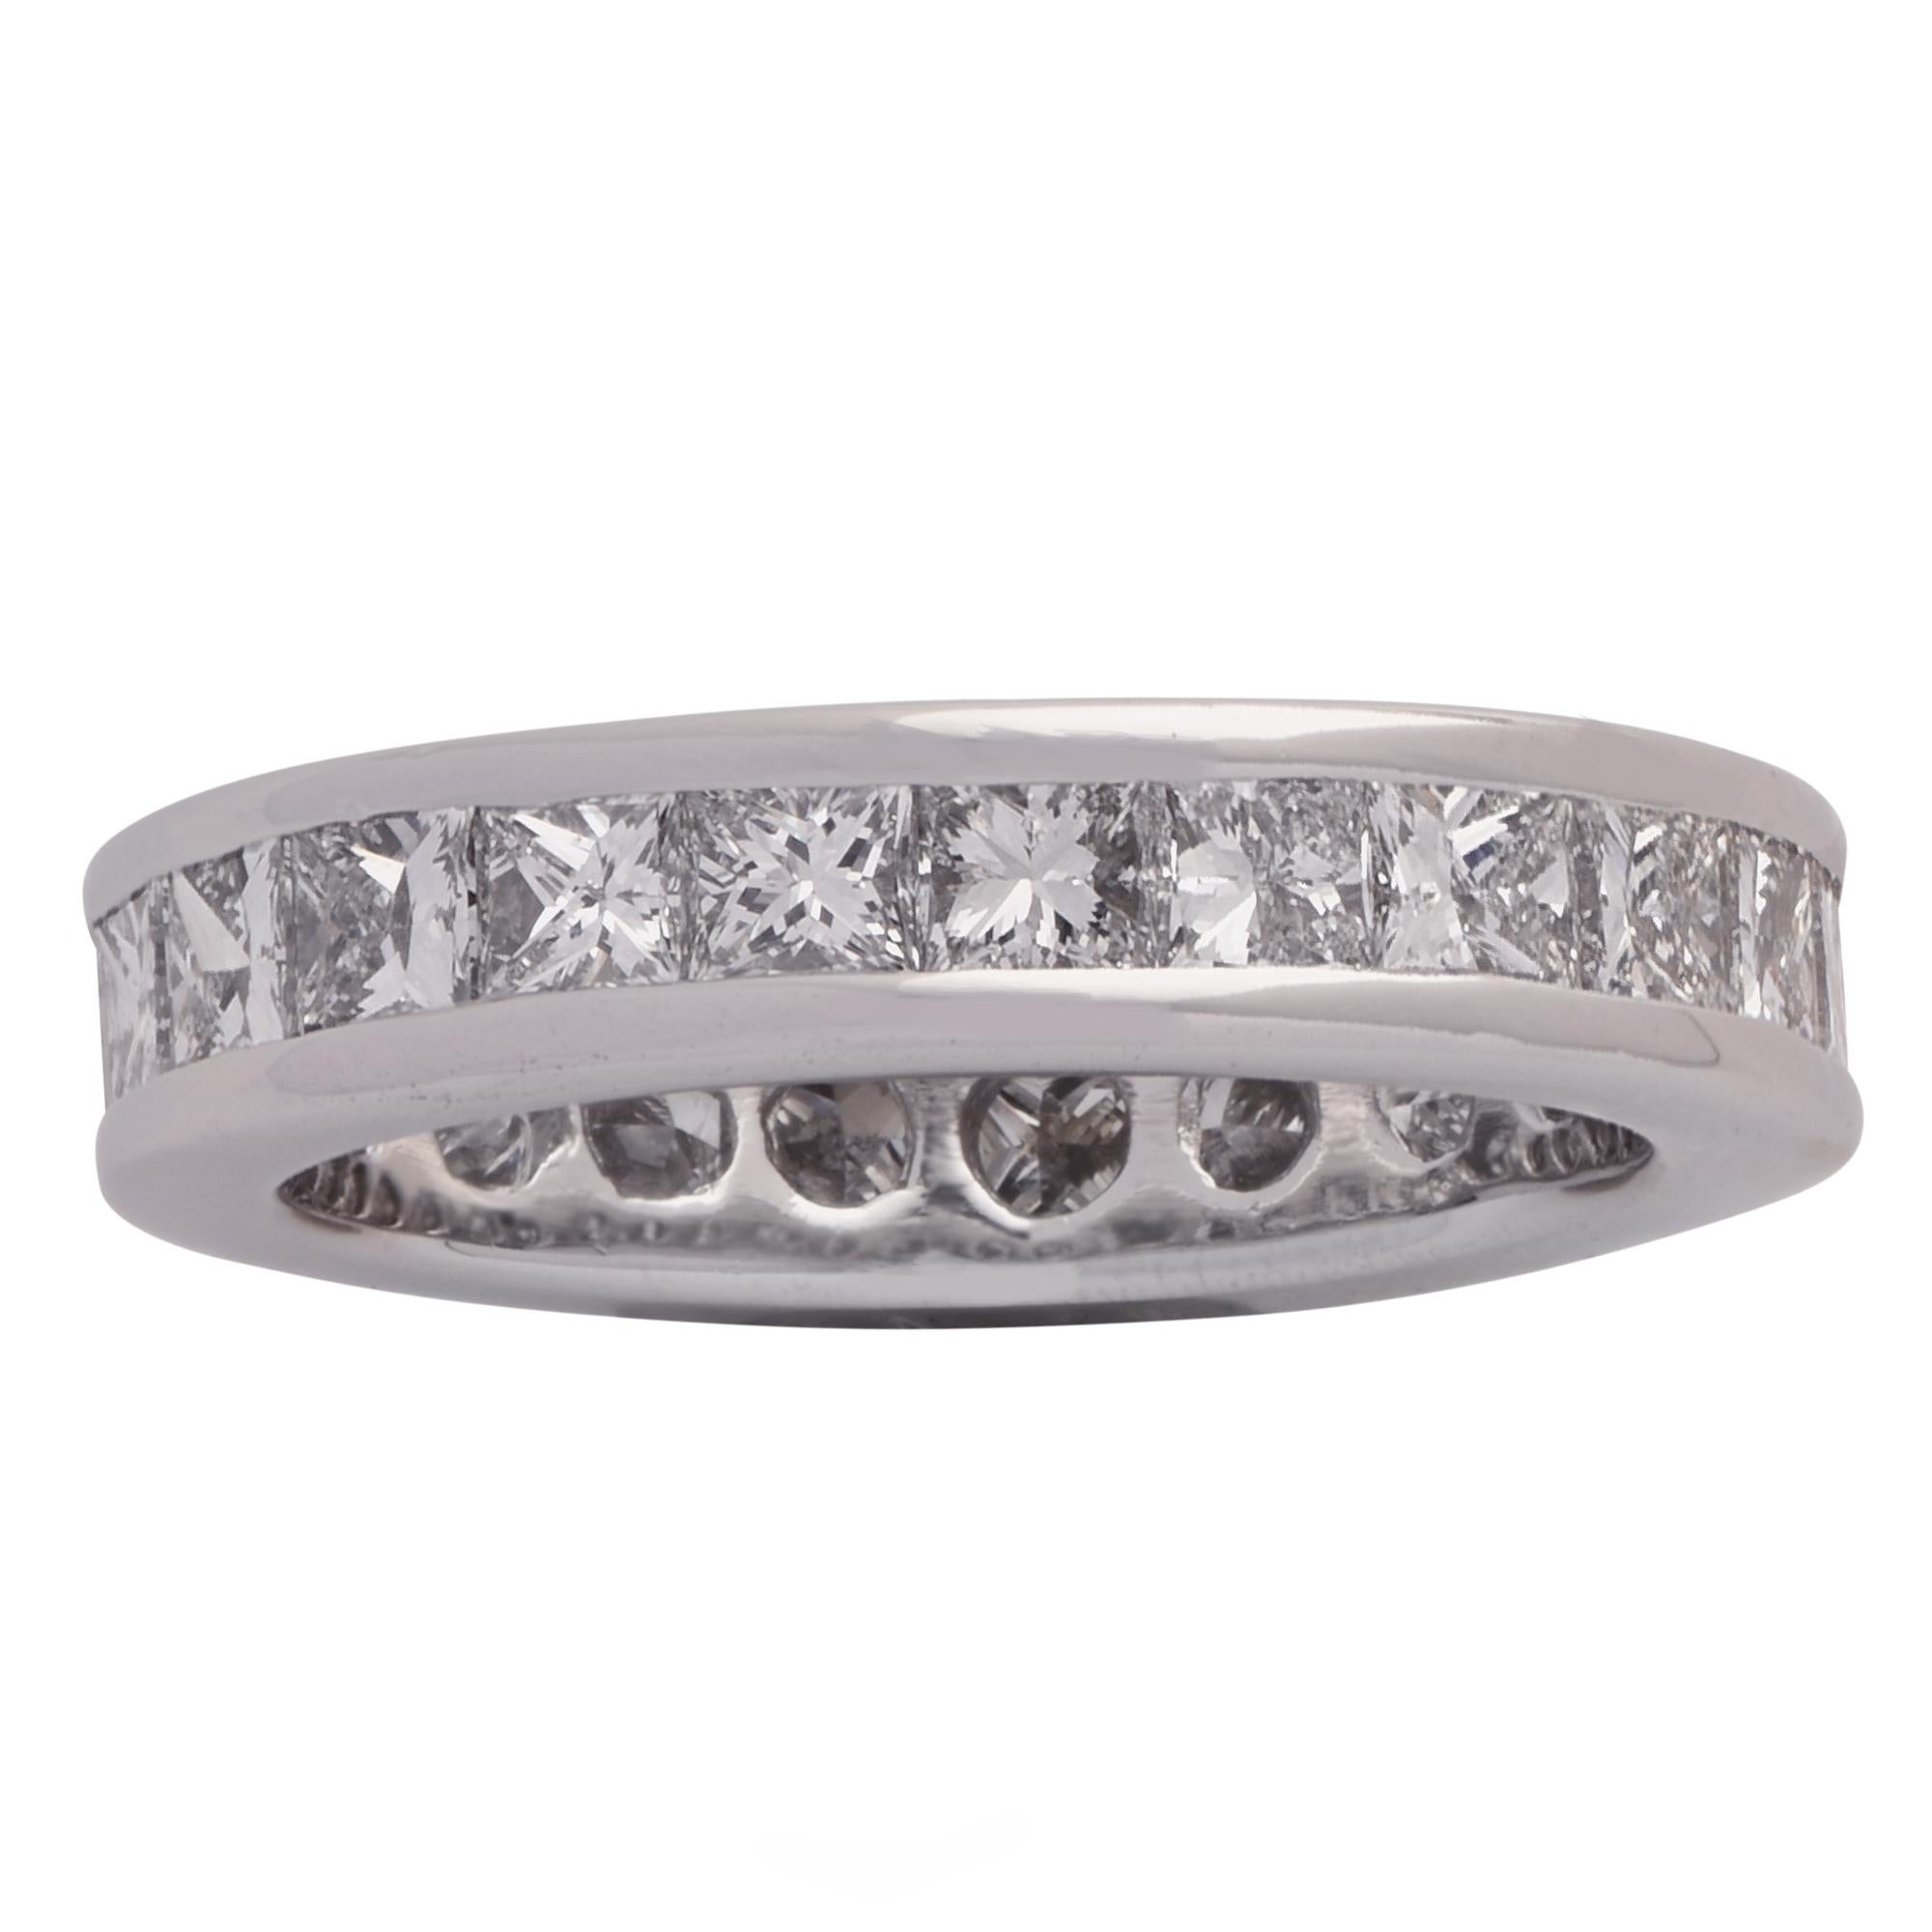 Classic eternity band crafted in platinum, featuring 20 princess cut diamonds weighing approximately 3.75 carats total, G color VS clarity. The princess cut diamonds are channel set, creating a stream of eternal brilliance and fire. This beautiful